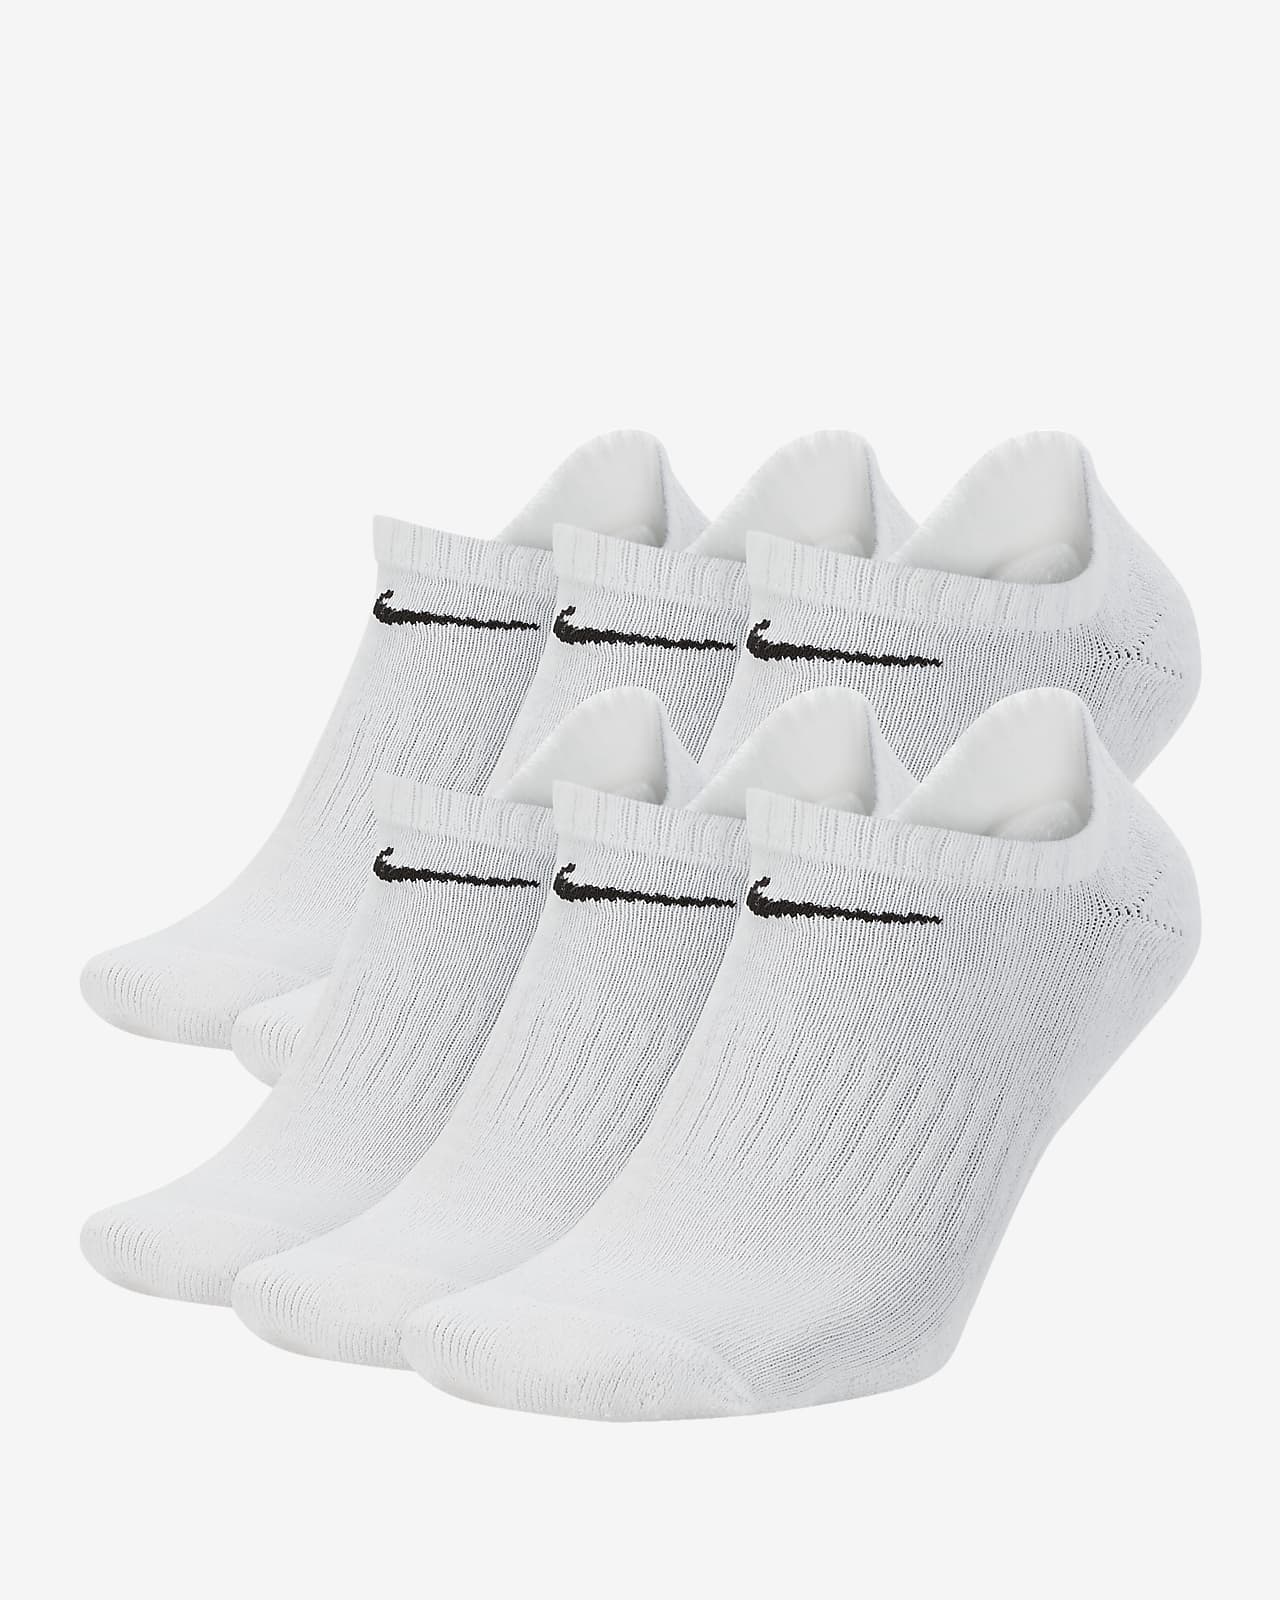 Chaussettes de training invisibles Nike Everyday Cushioned (6 paires)